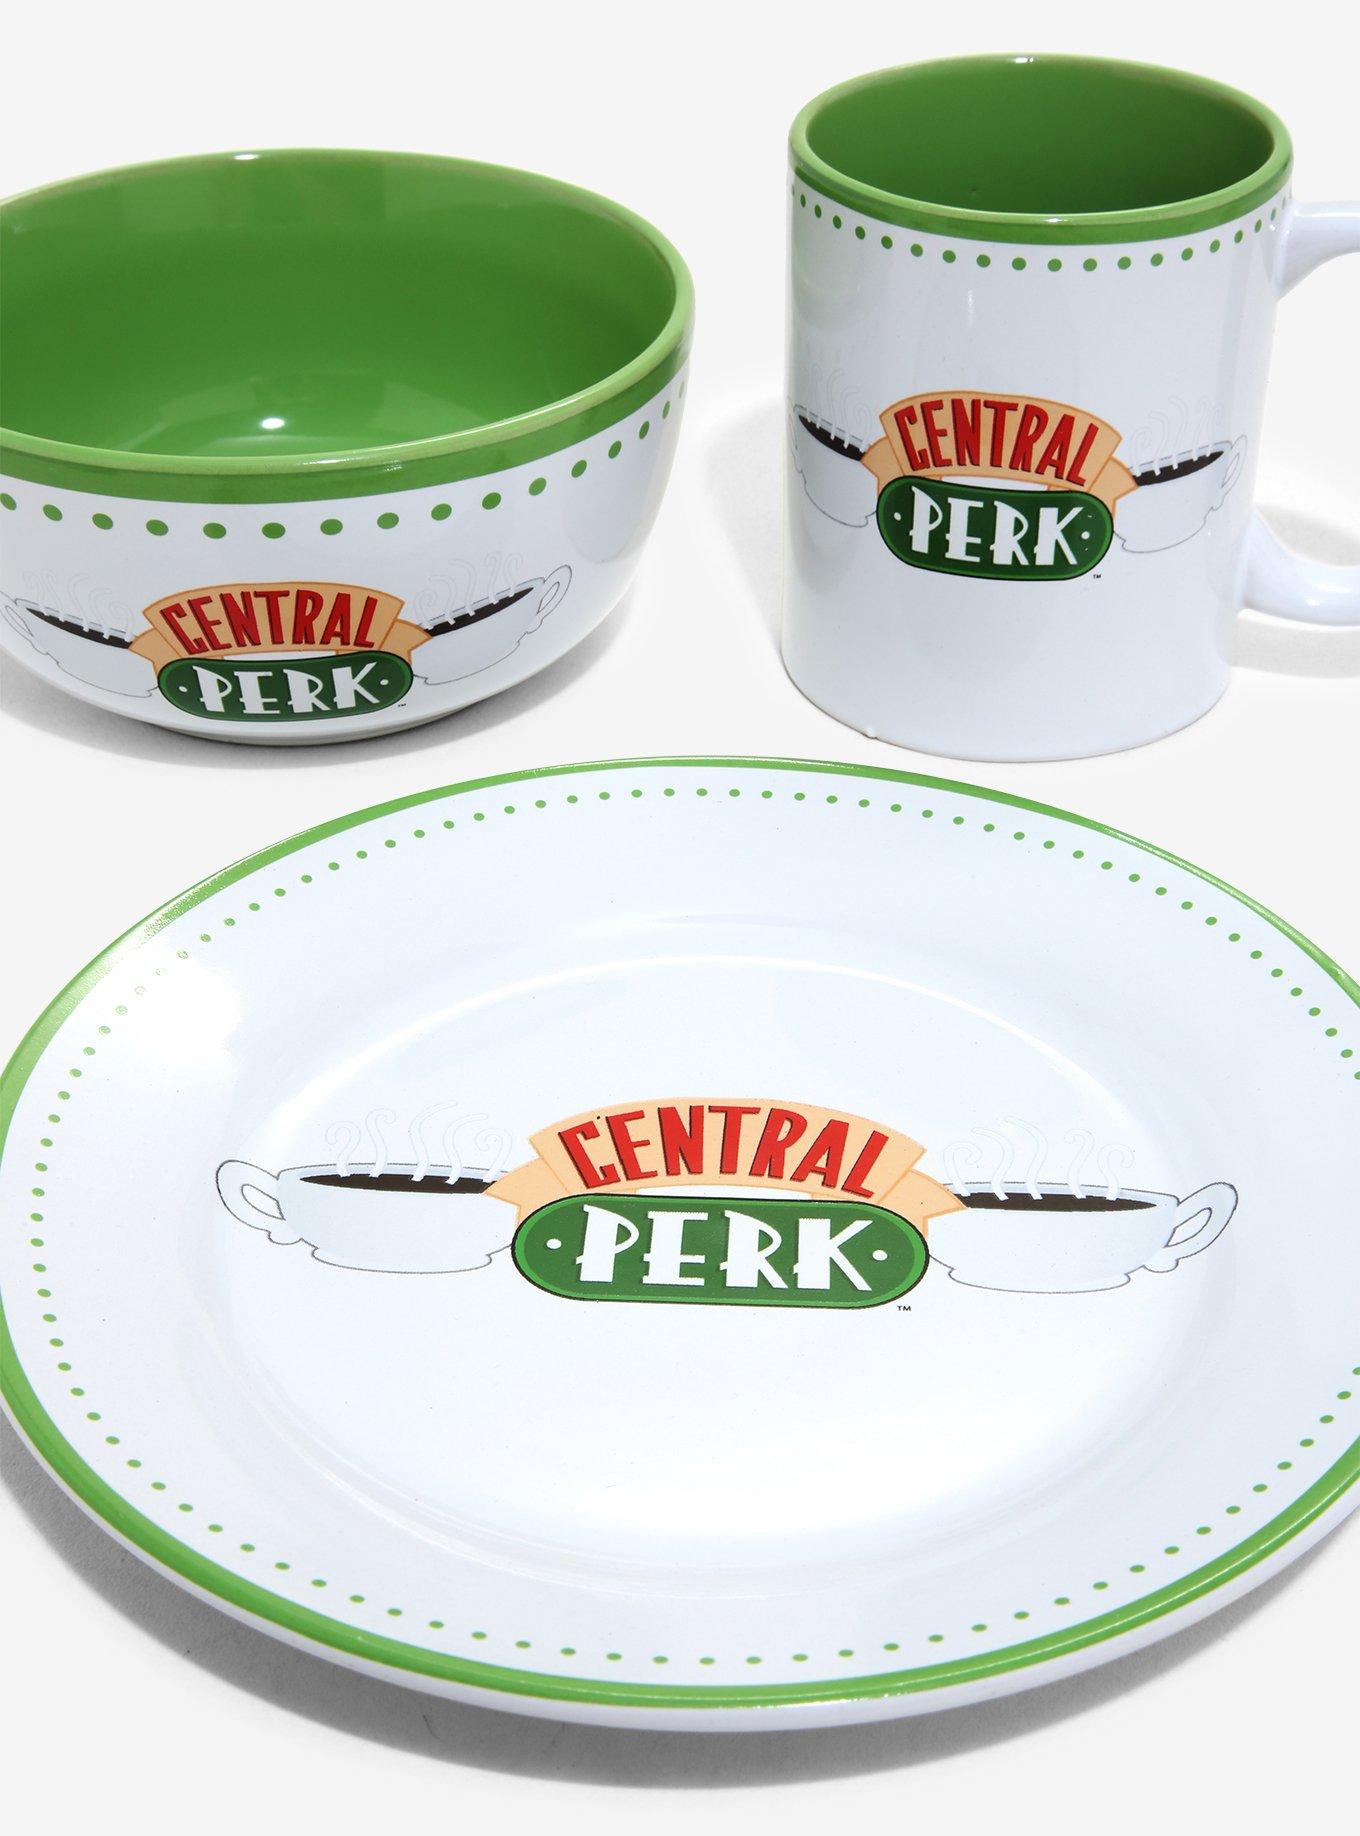 Friends Central Perk 12 Piece Dinner Set with 4 Bowls 4 Dinner Plates and 4 Side Plates Friends TV Series Central Perk Dinnerware